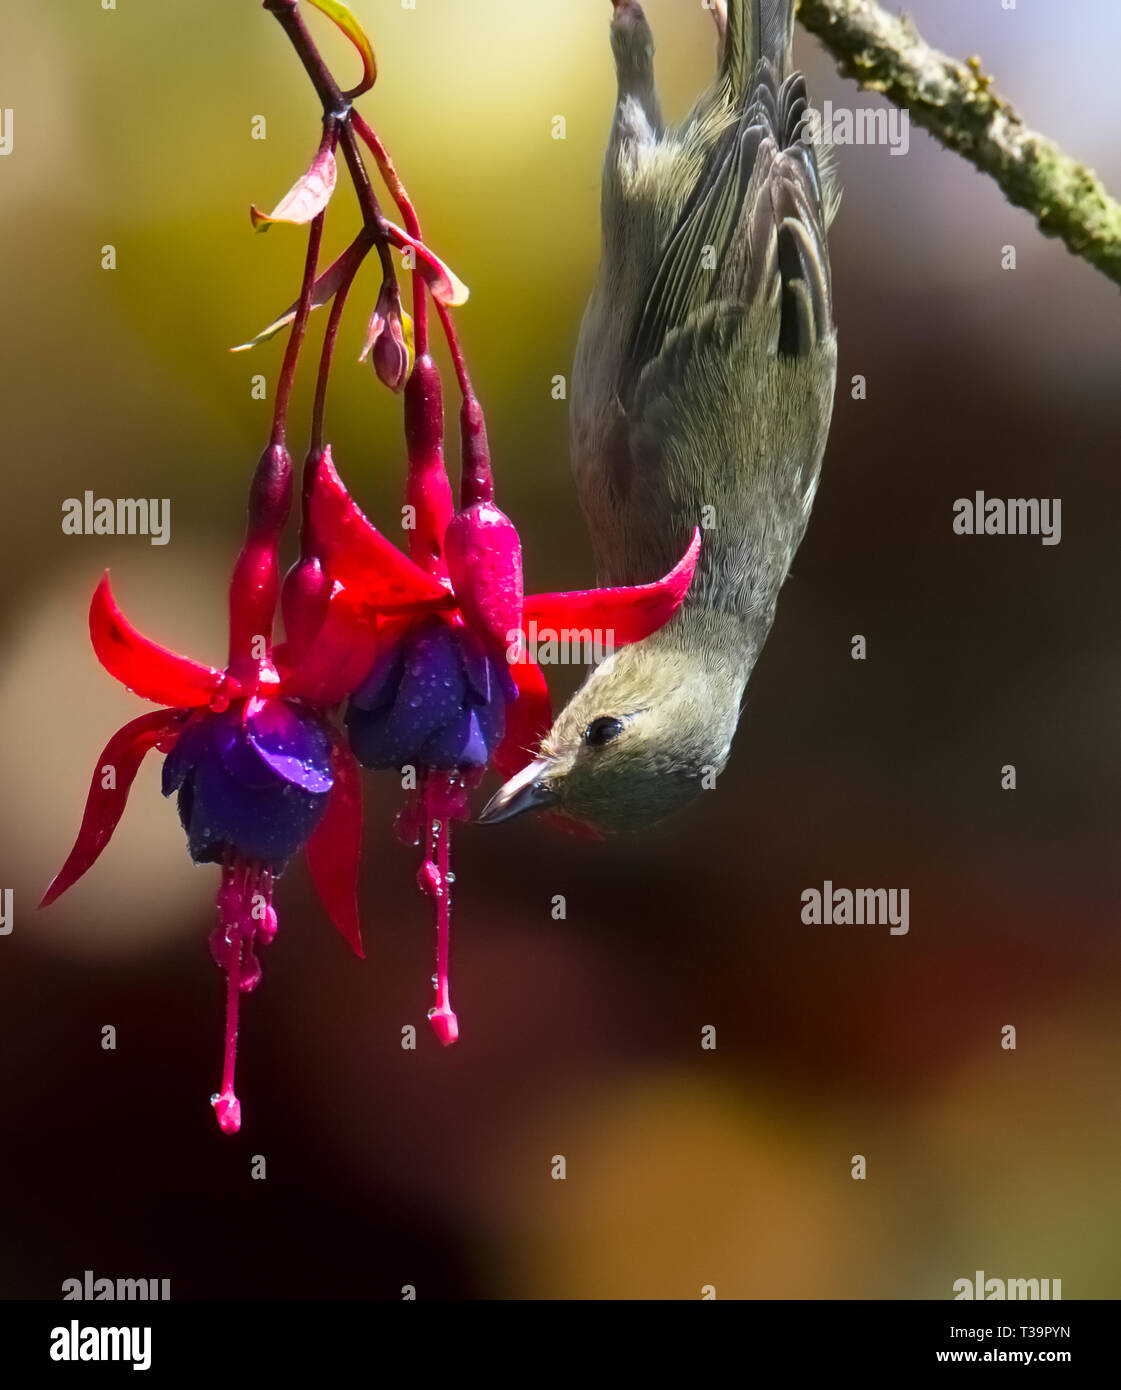 Hanging upside down a Tennessee Warbler reaches its beak out to drink nectar from a red puple flower Stock Photo